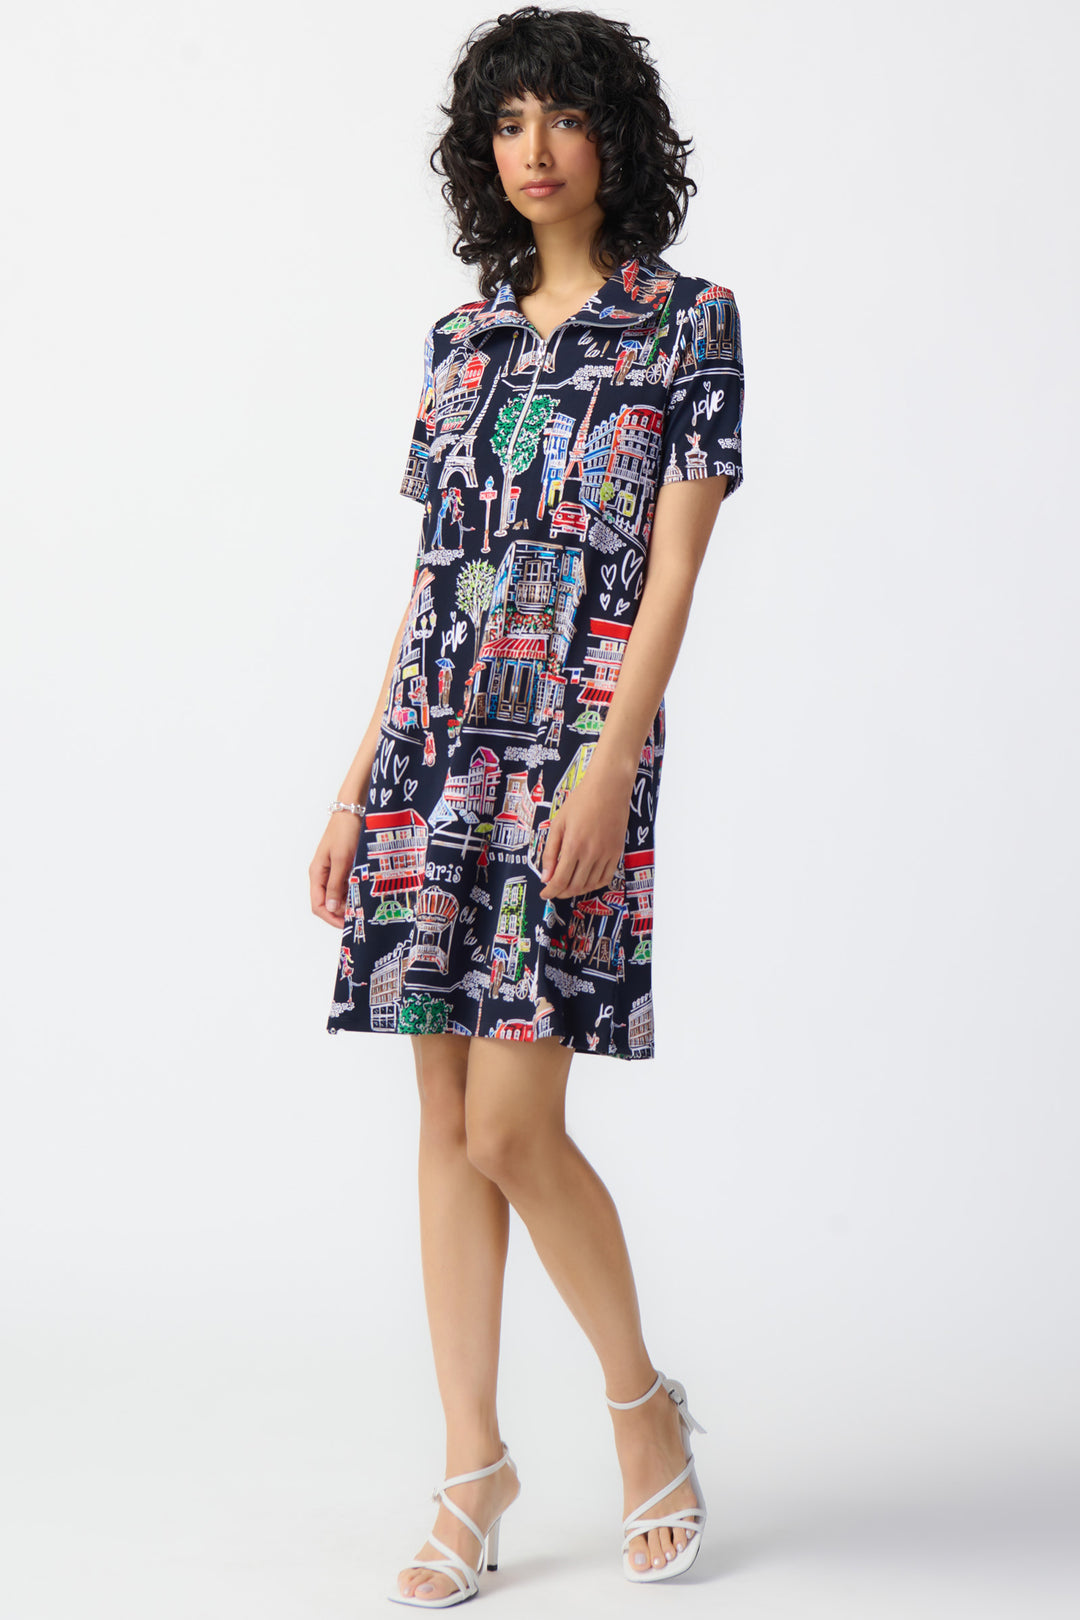 Featuring a zippered neckline and a beautiful Parisian scene, this short dress is the perfect travel companion!